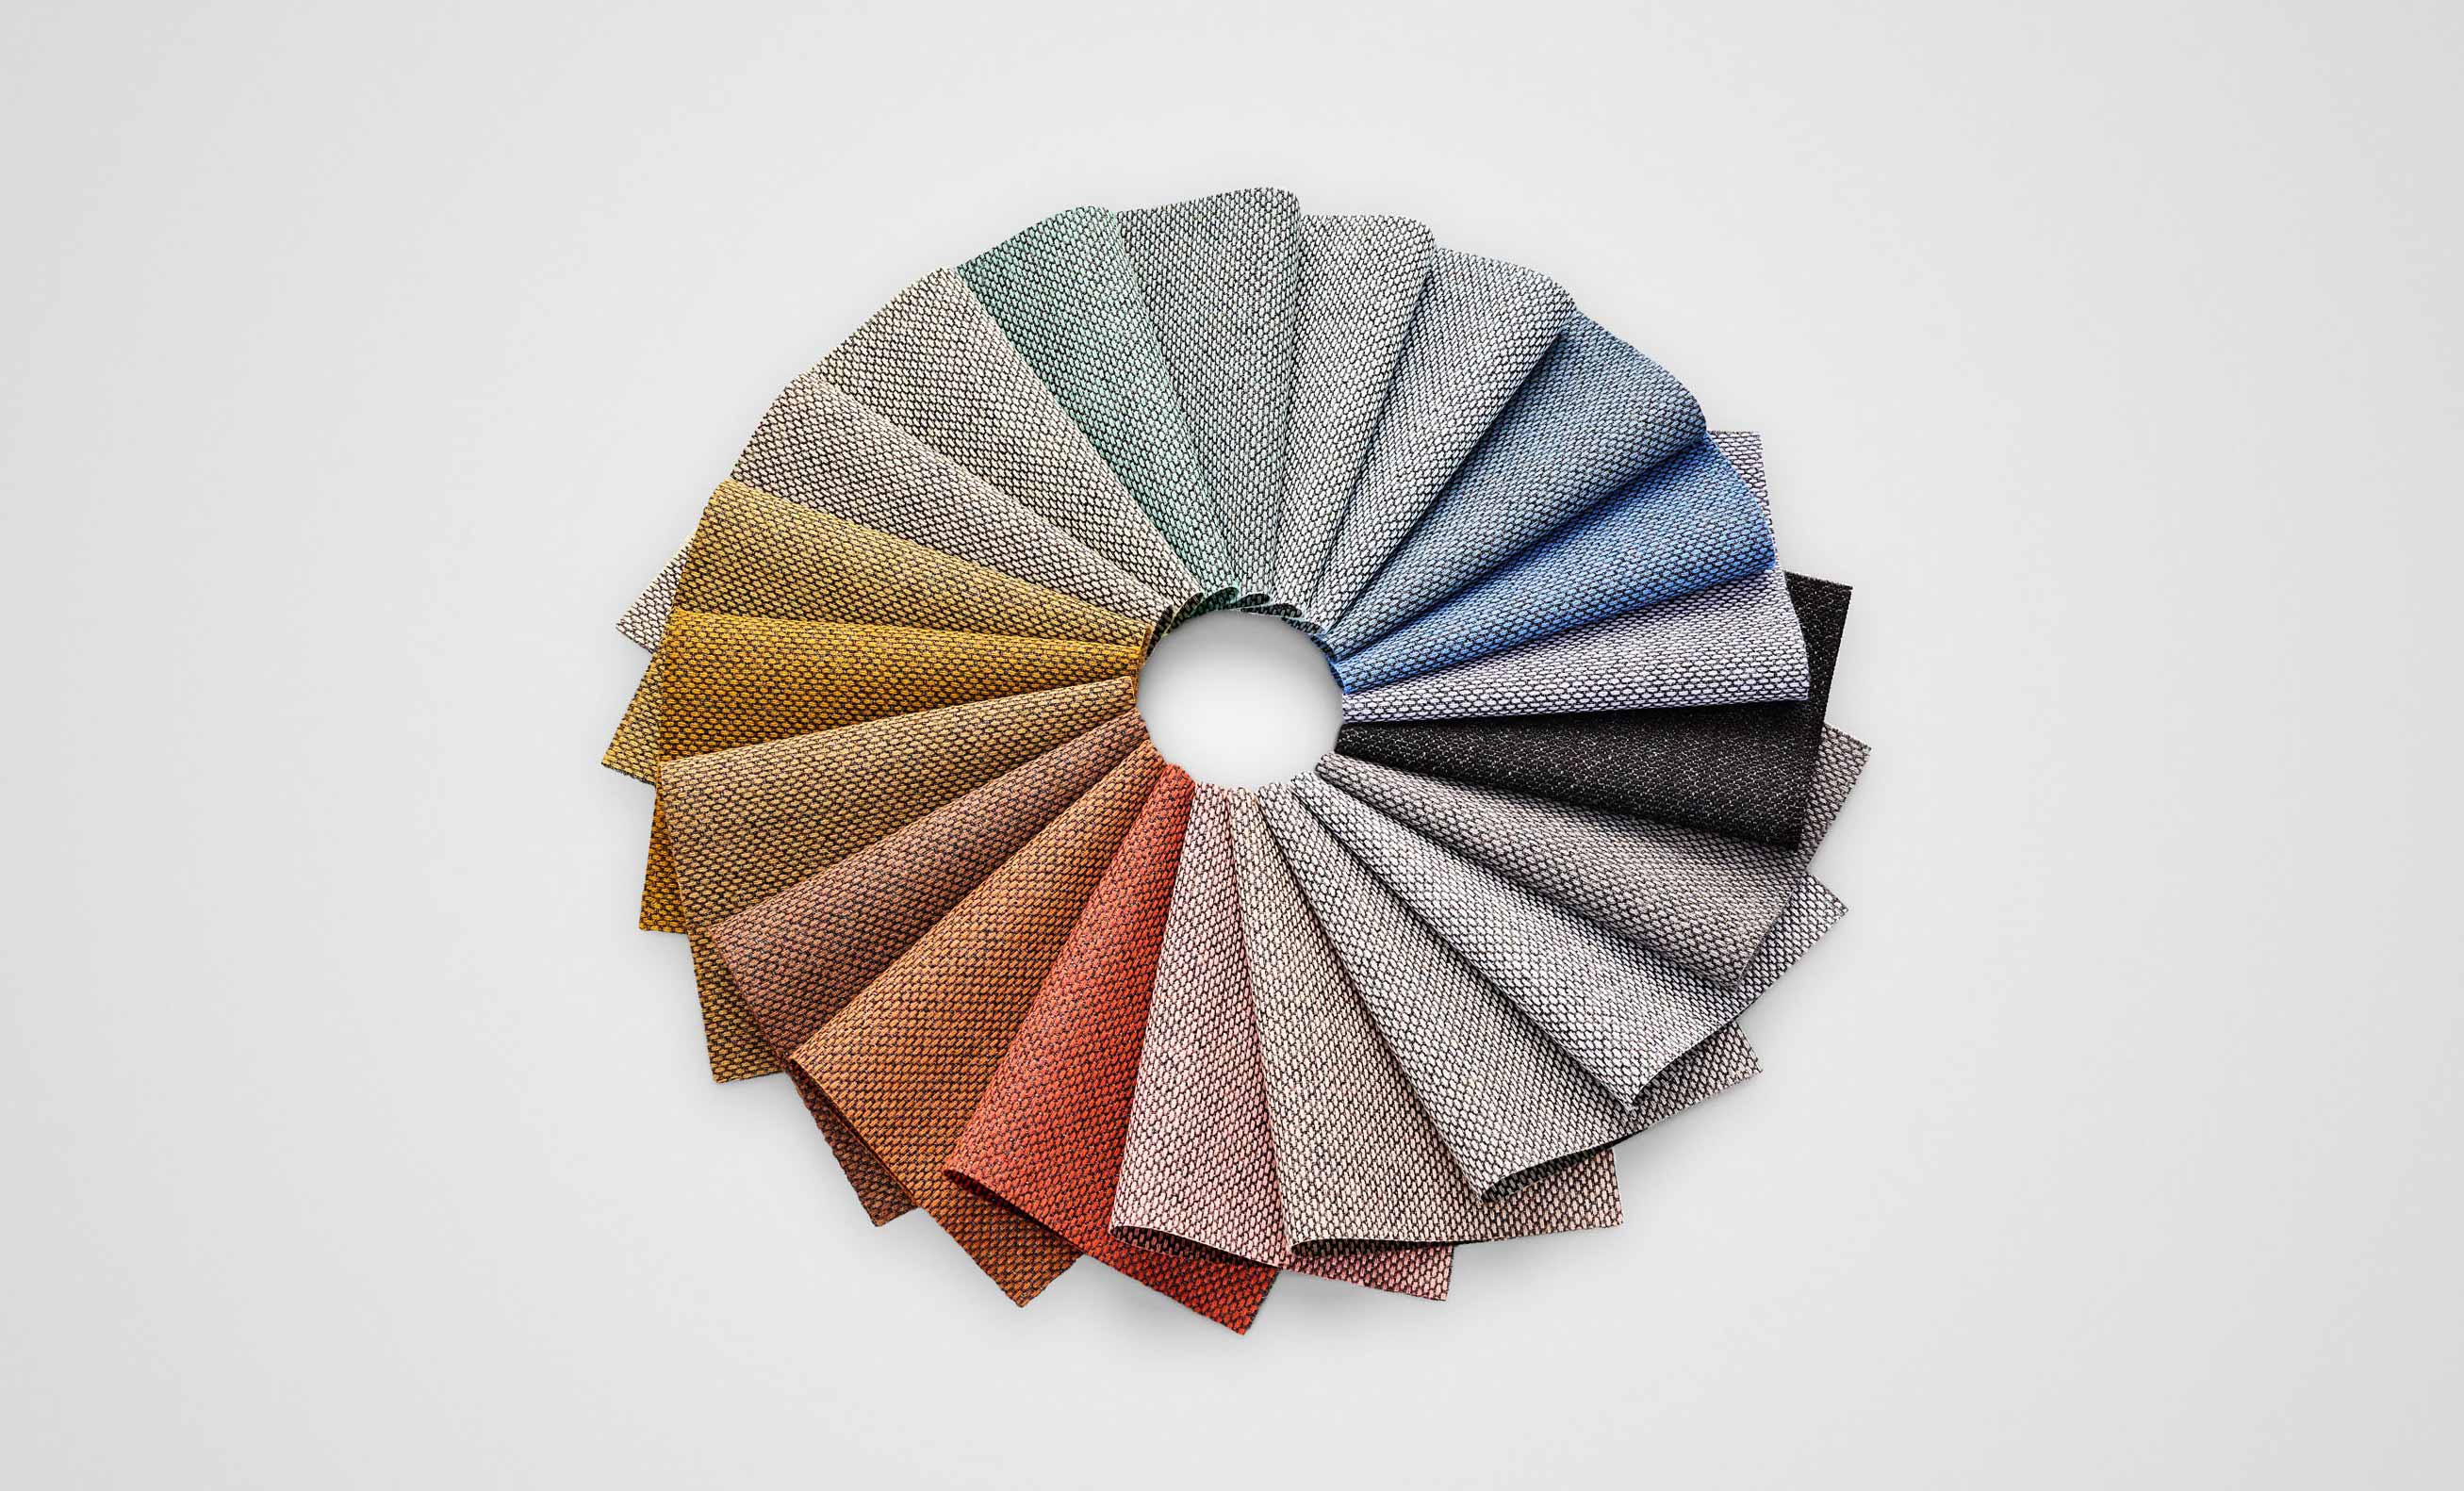 selection of re-wool fabric colour samples laid out in a wheel shape